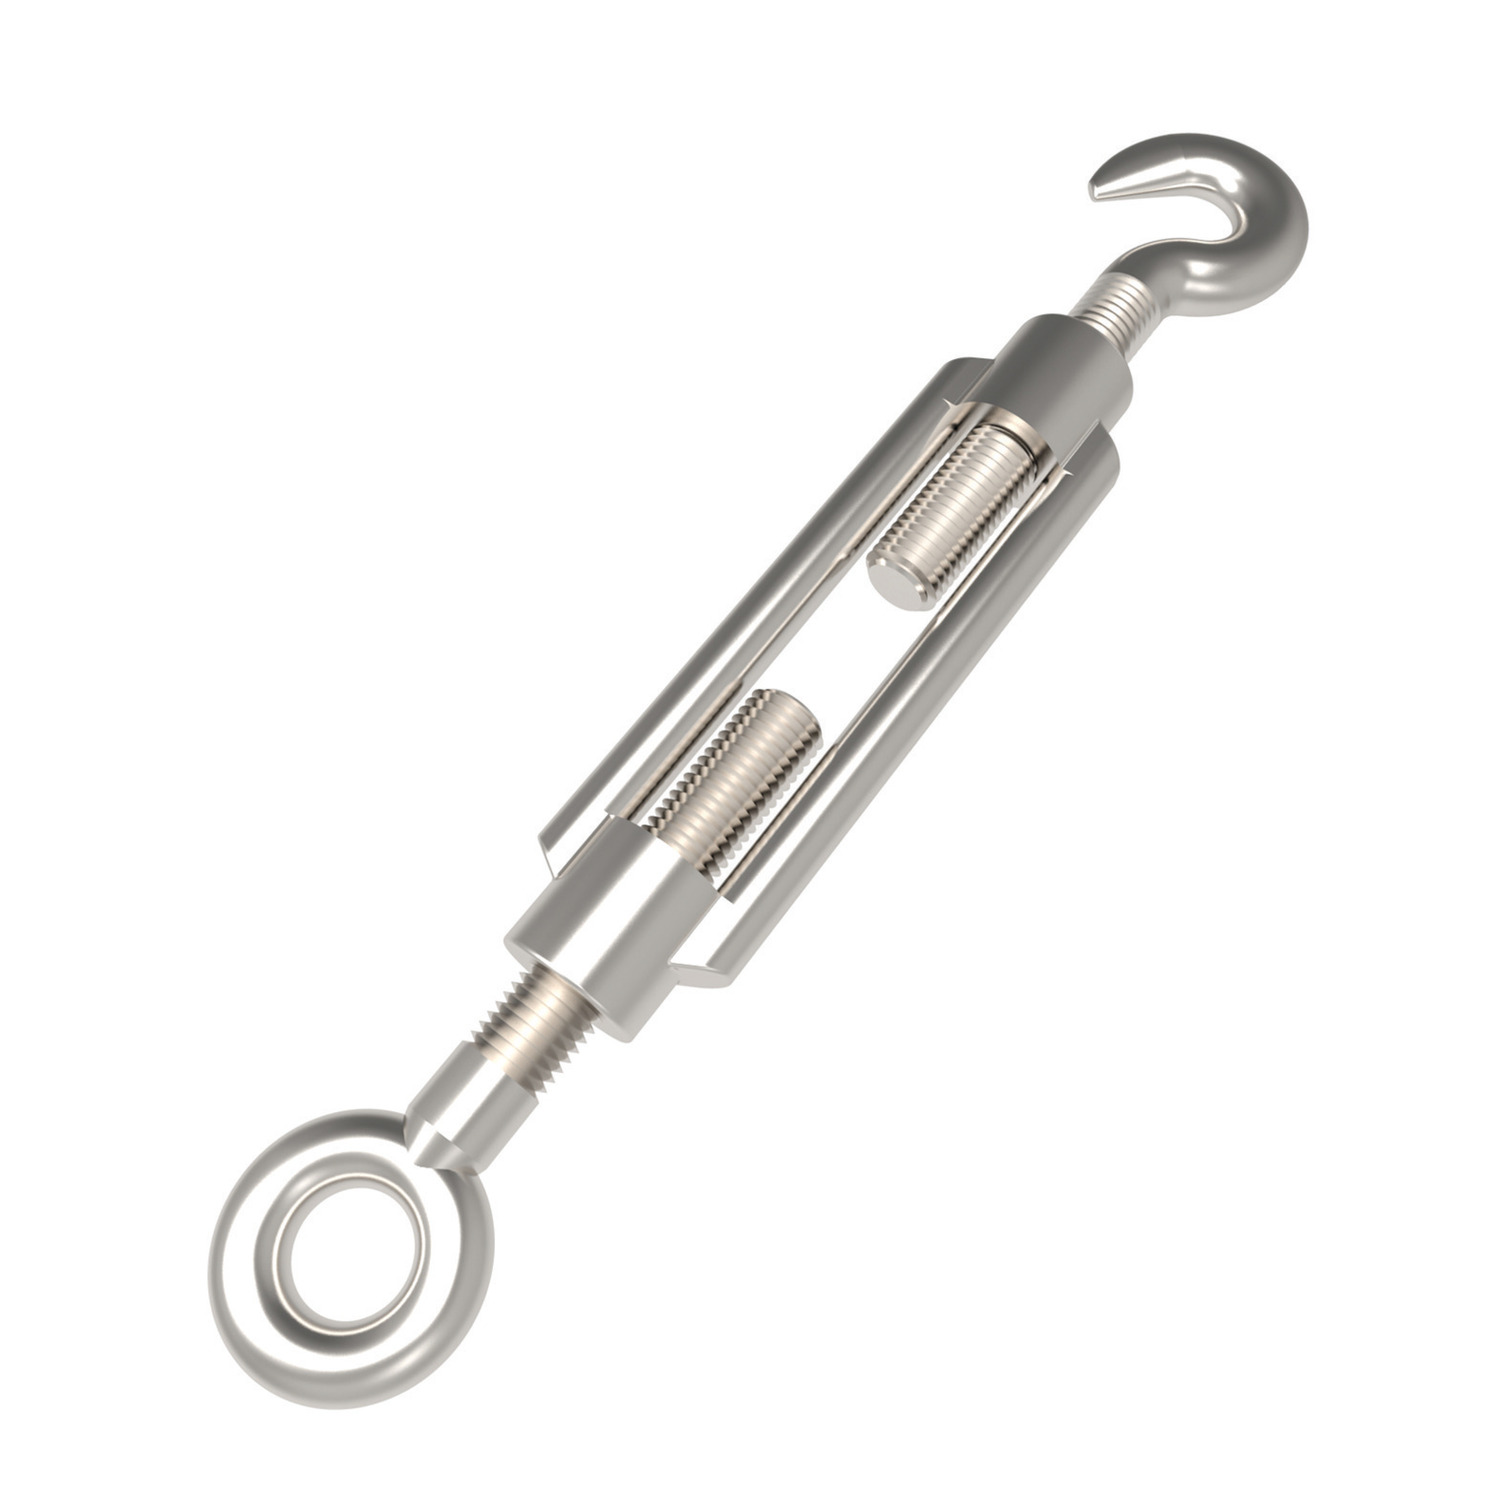 R3852.006-A4 Hook & Eye Turnbuckles M6 A4 s/s Not to be used for lifting unless SWL marked.